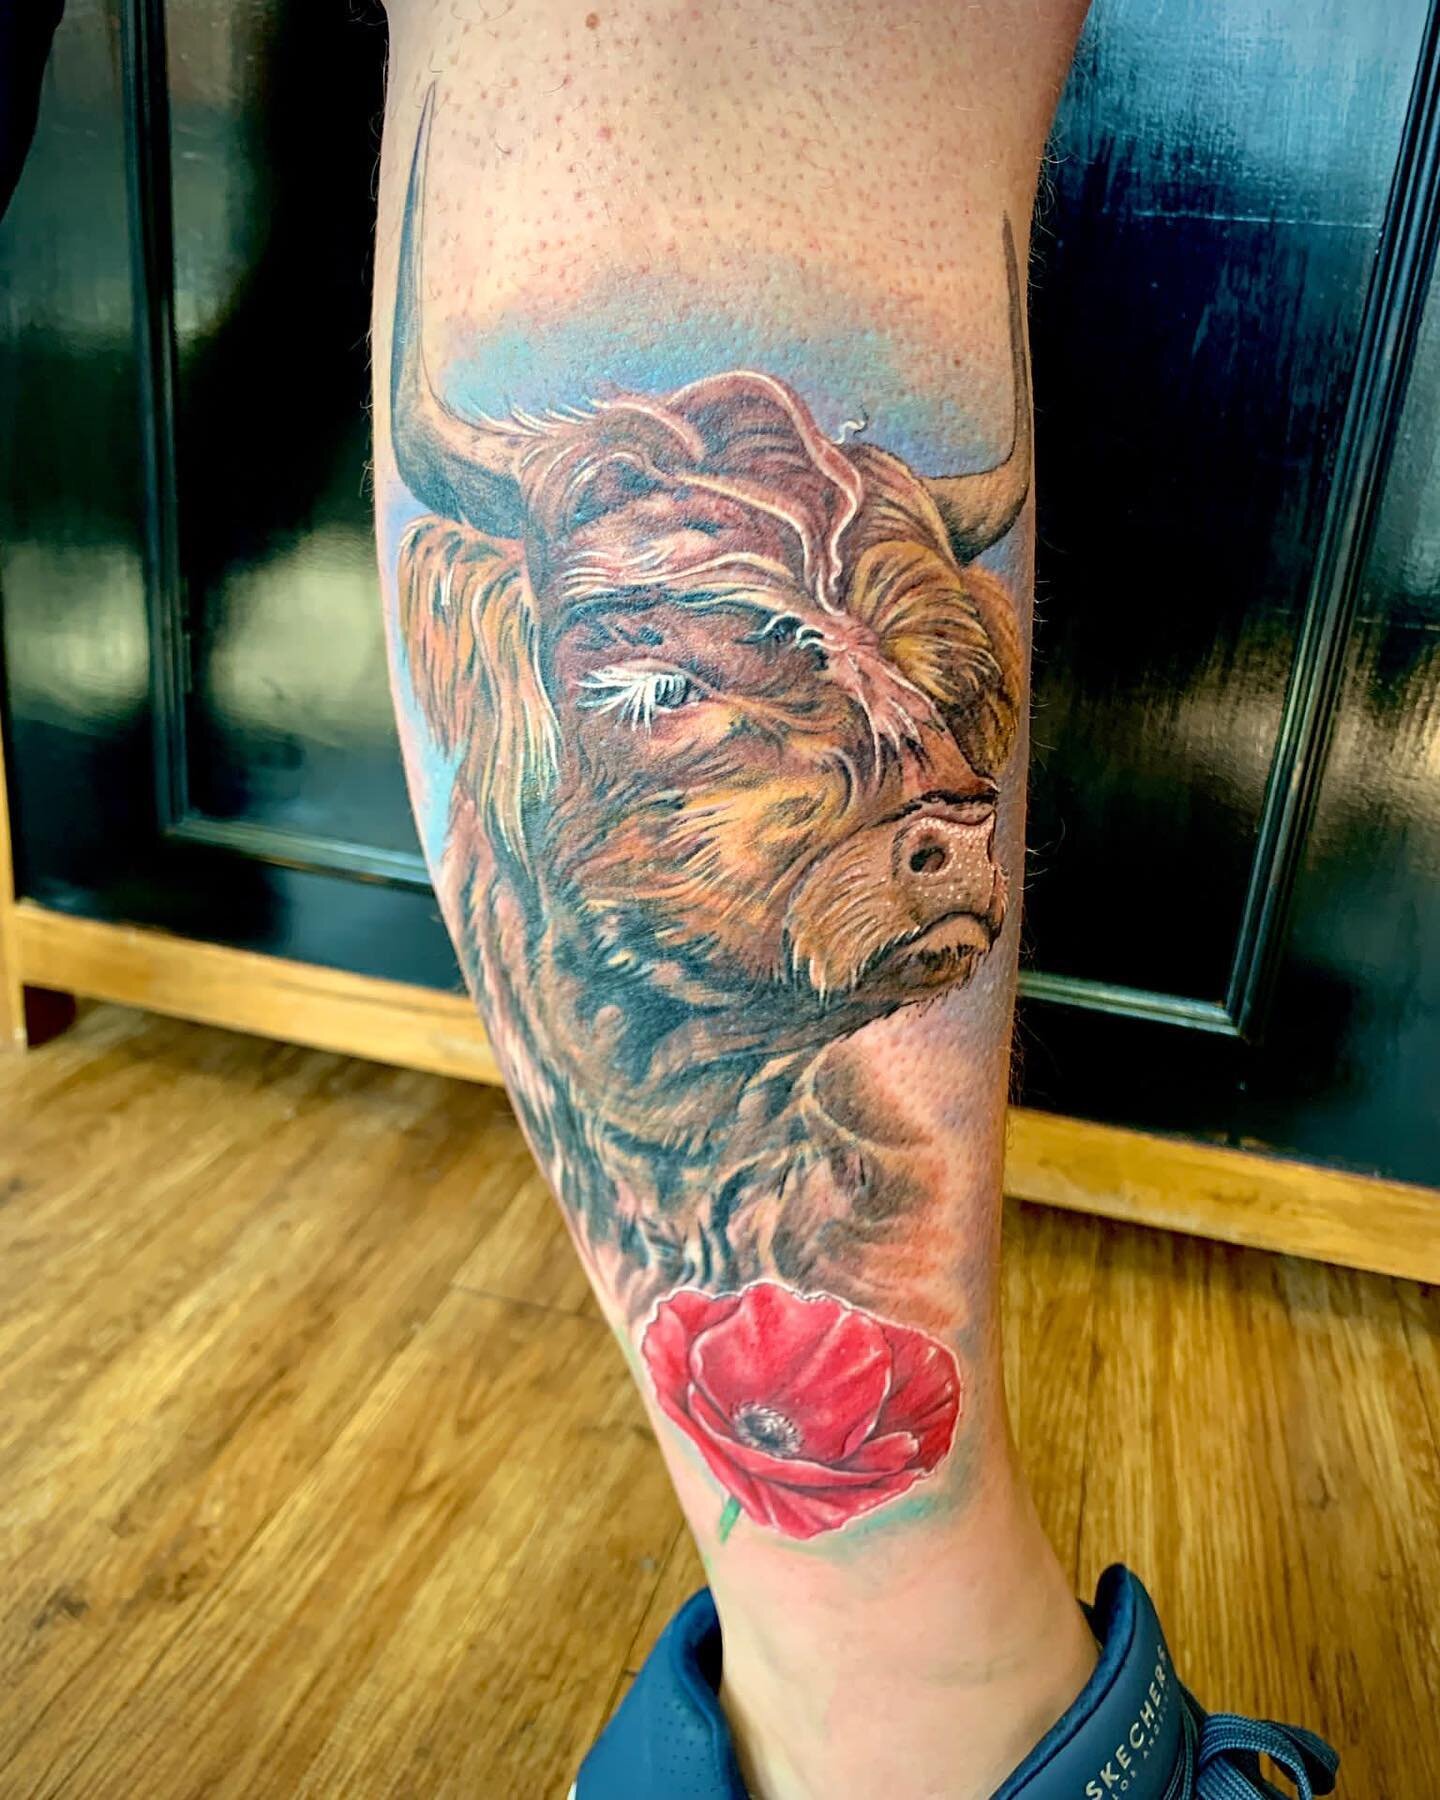 Incredible highland cow tattoo done by the awesome @charlieleightattoostuff 

This is actually a coverup believe it or not!

Made with @biotat_ 

#coloureealism #colourtattoo #tattooartist #colourtattoos #colourrealismtattoo #highlandcow #highlandcow